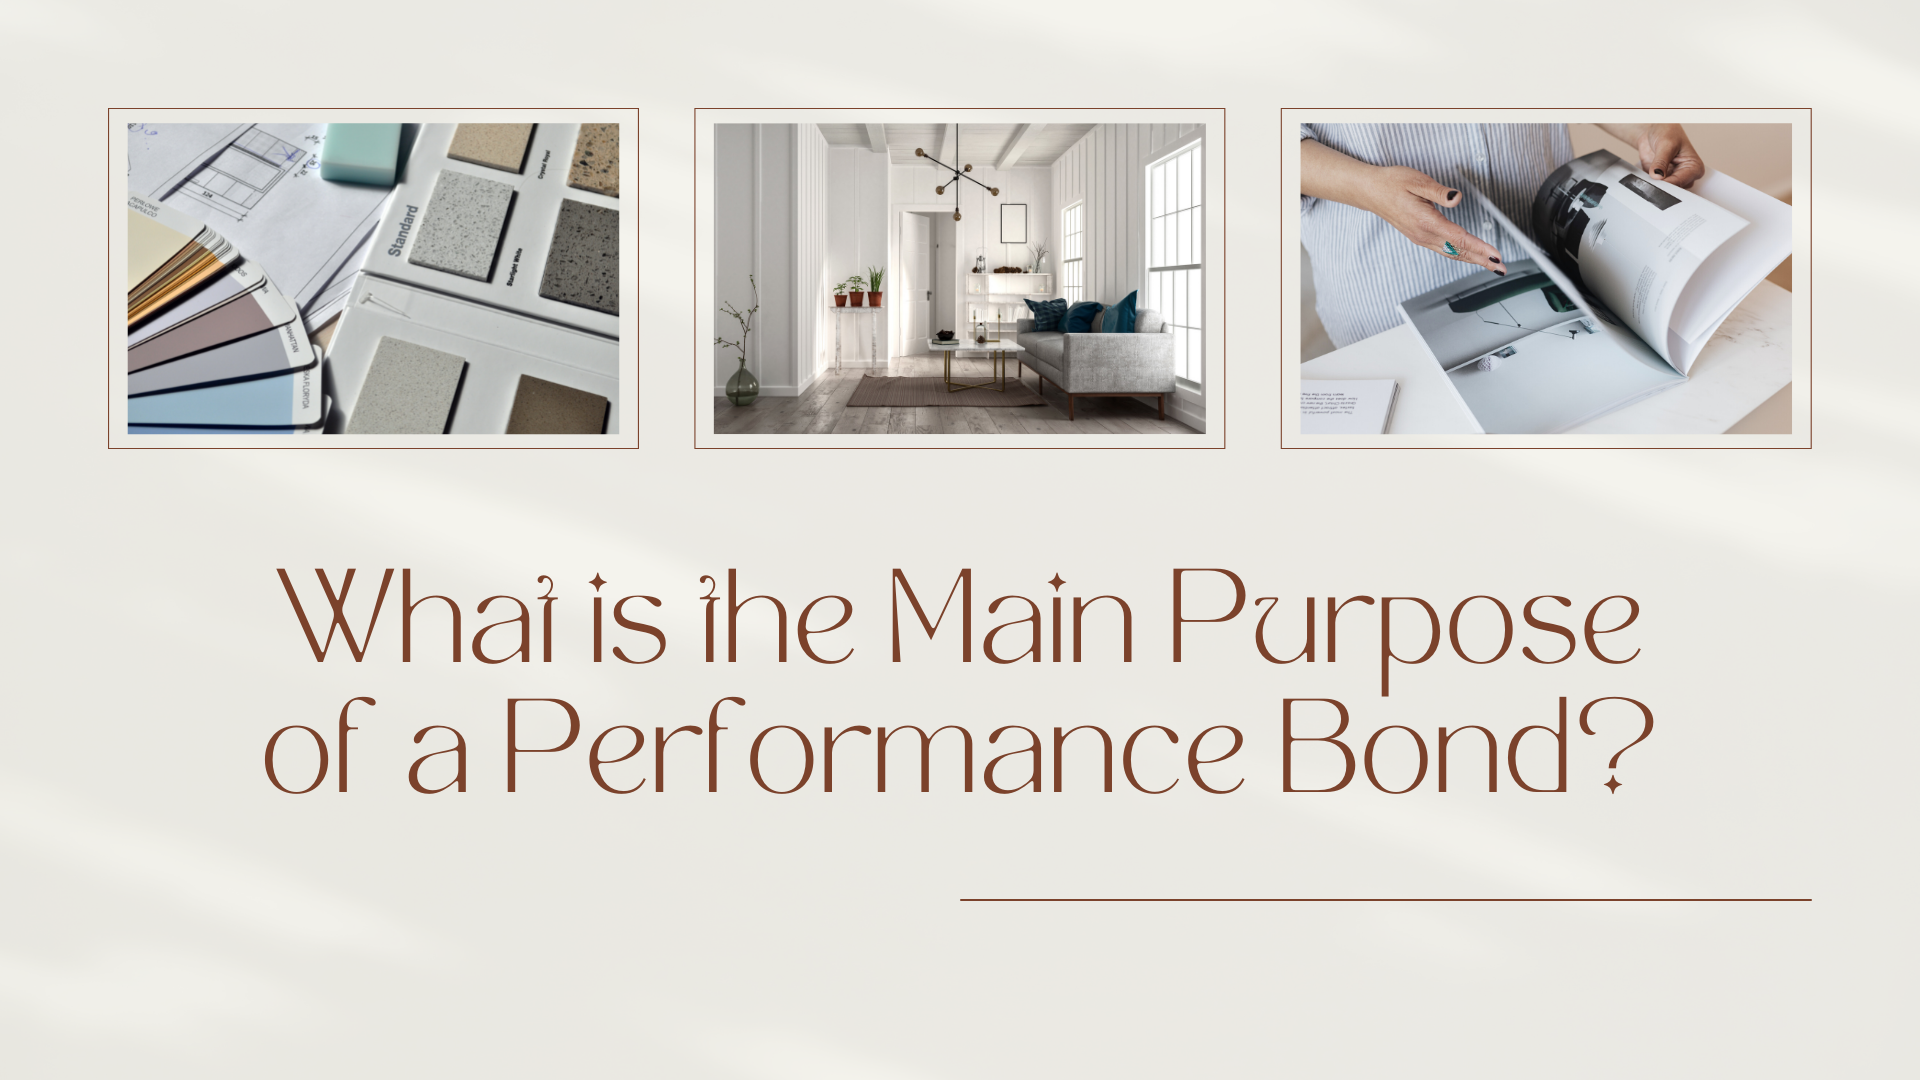 performance bond - What is a performance bond for - minimalist home